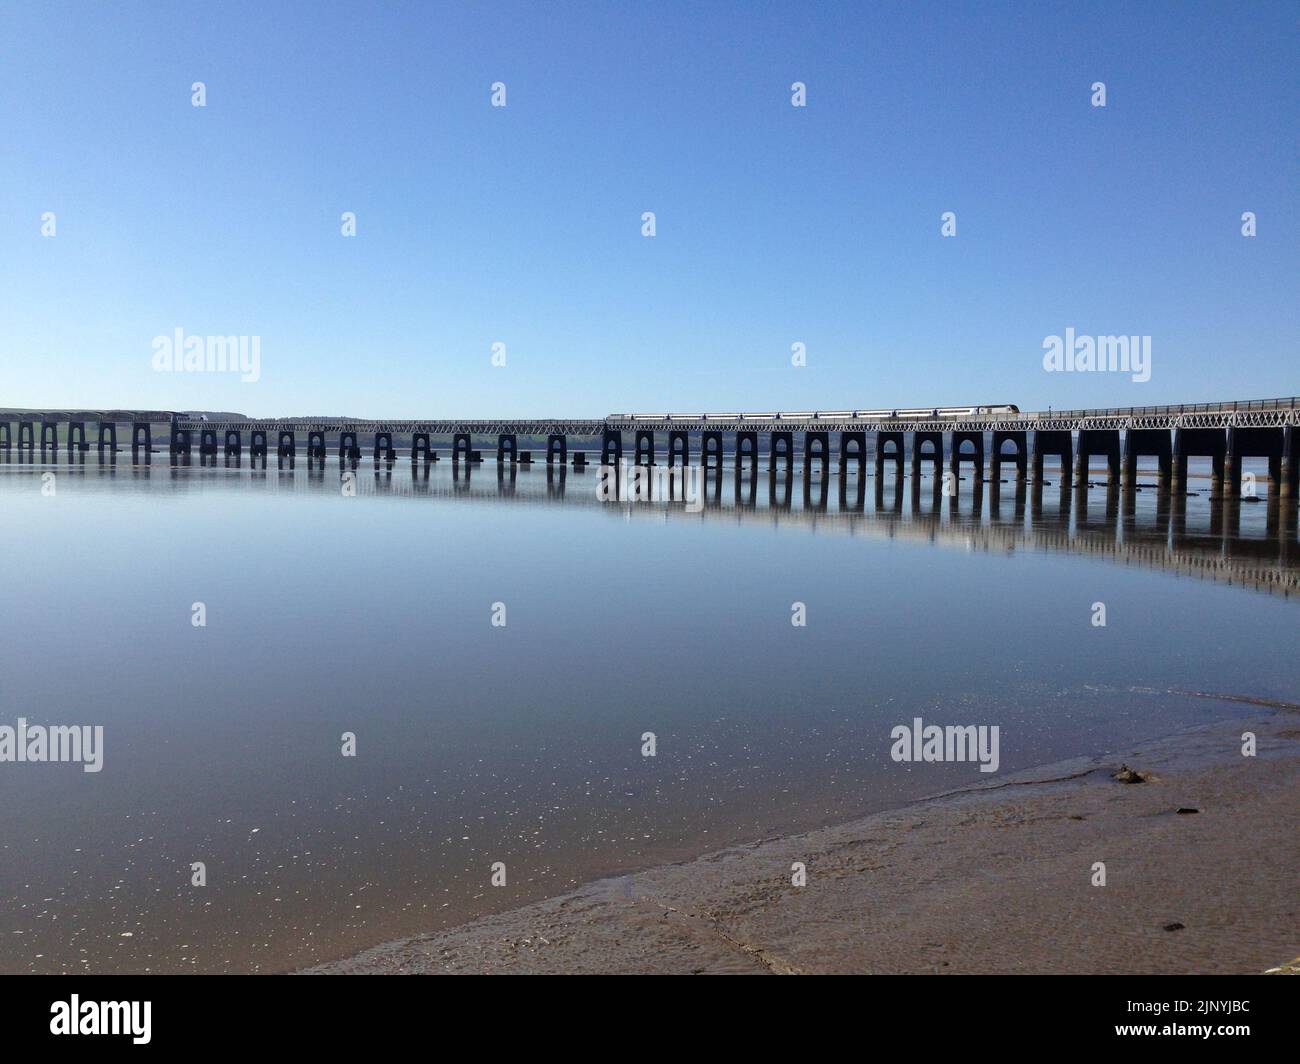 A train on the East Coast Mainline crossing the Tay Bridge, with reflection in the water in calm conditions under blue sky at Dundee, Scotland, UK. Stock Photo